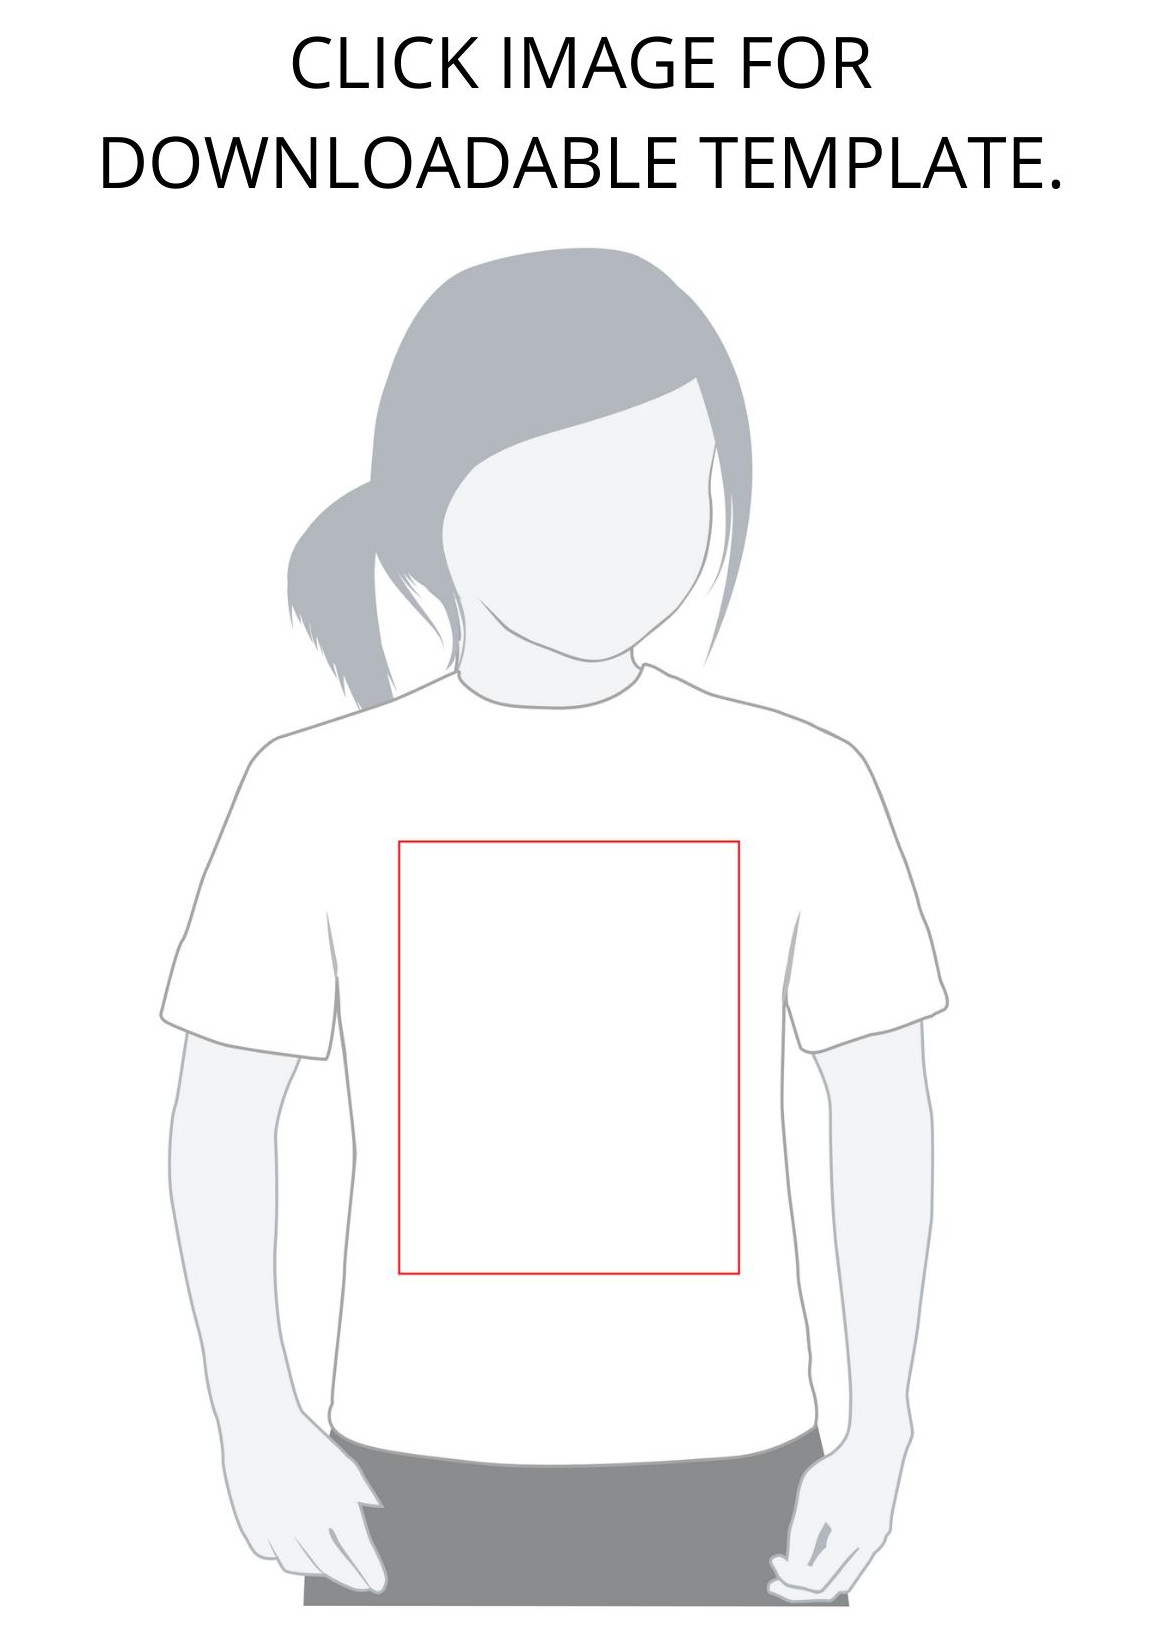 Girls' template for Total Merchandise T-shirt design competition